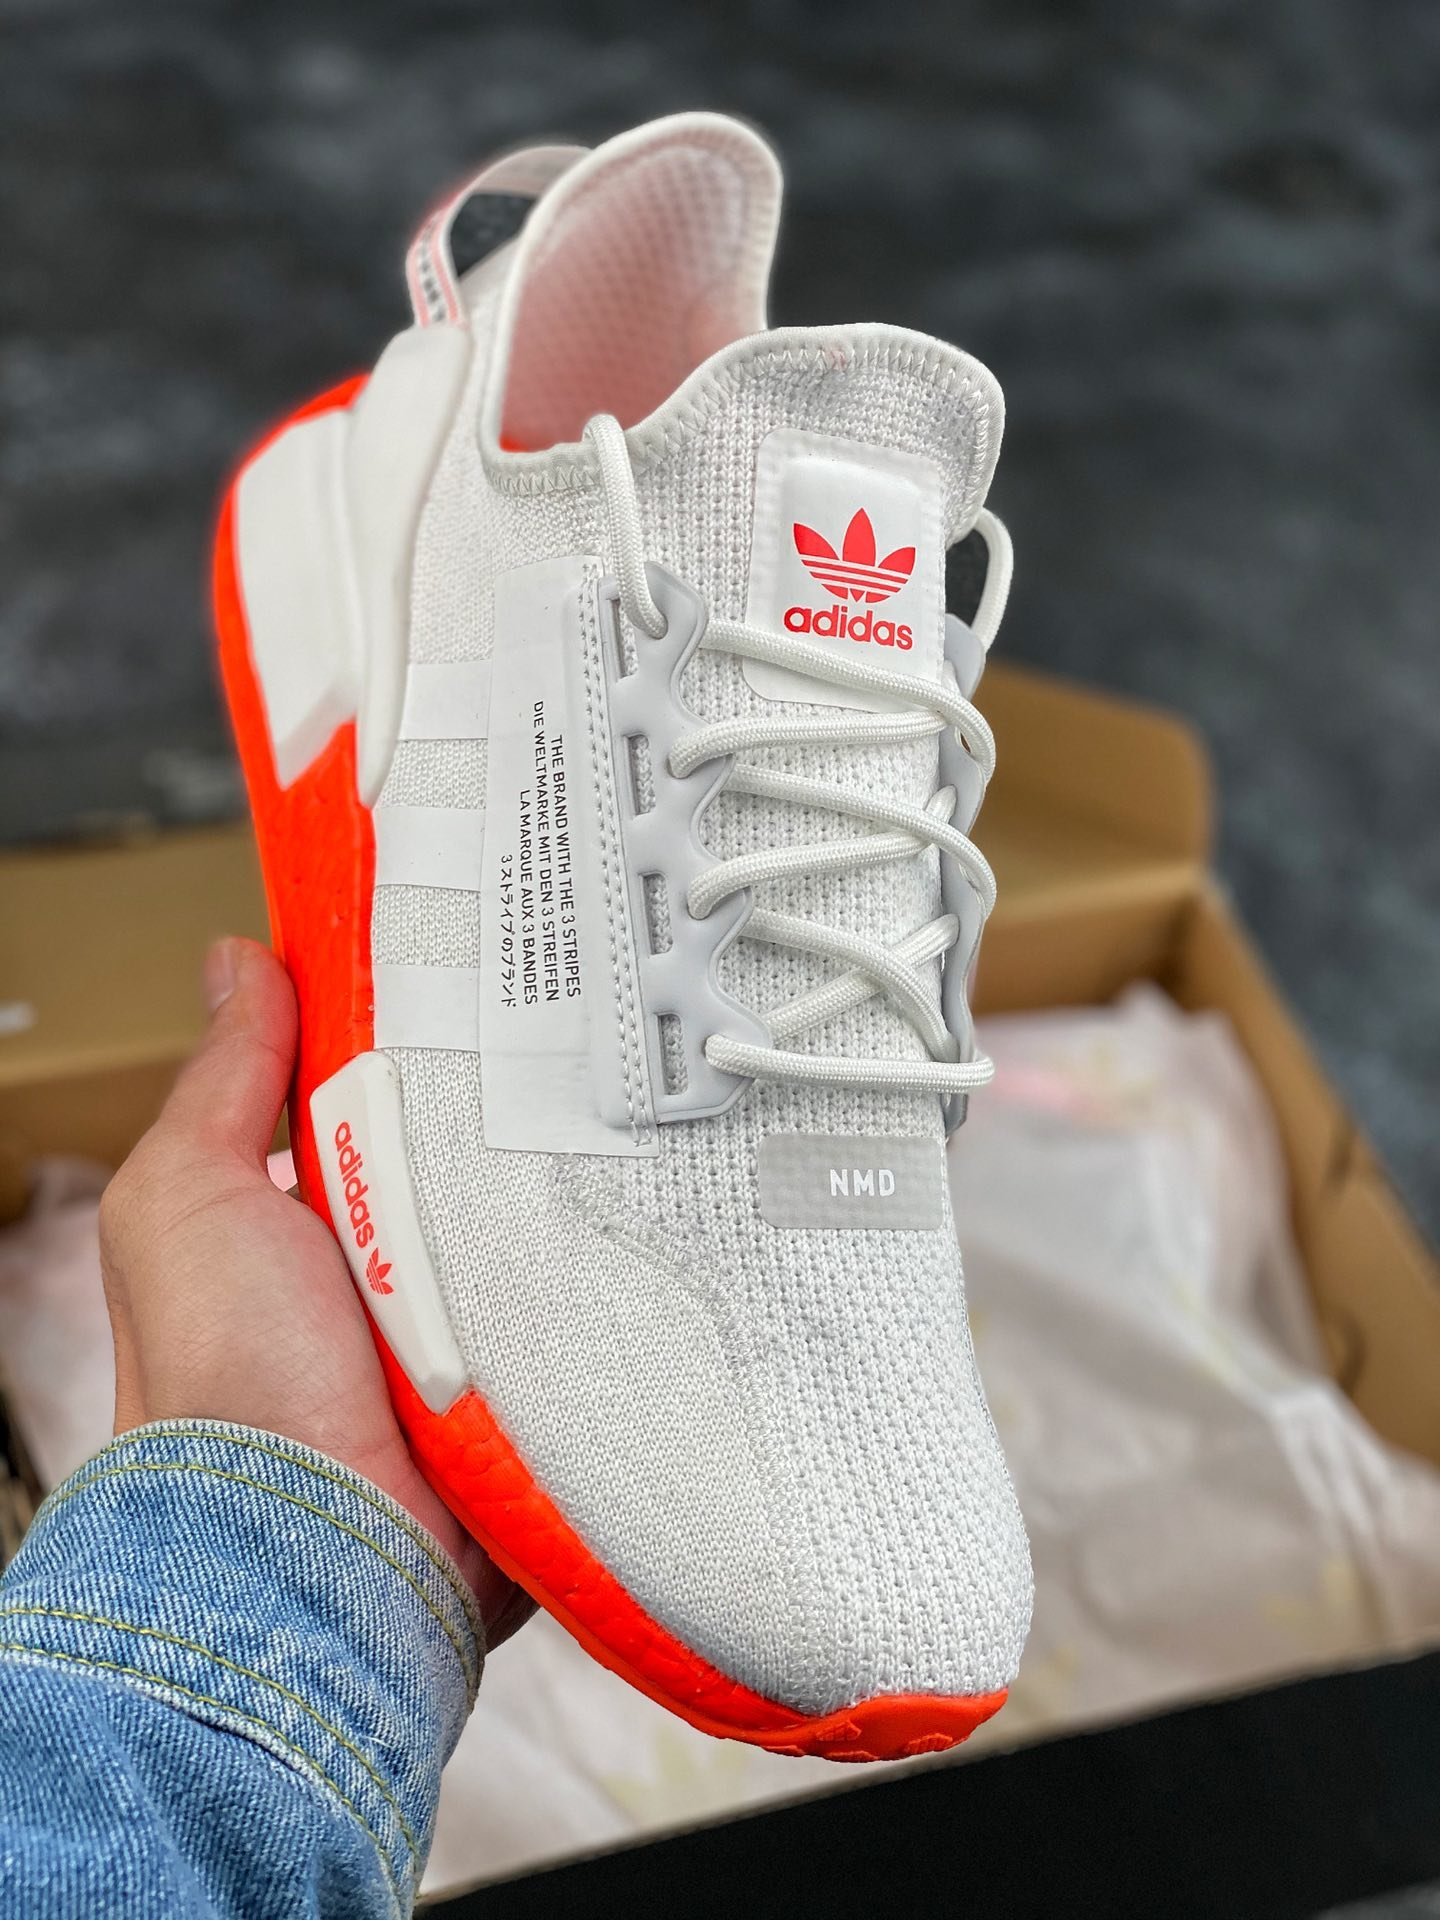 All White NMD R1 Group Purchase and PTT Recommendations 2020 Monthly Fly ratio price